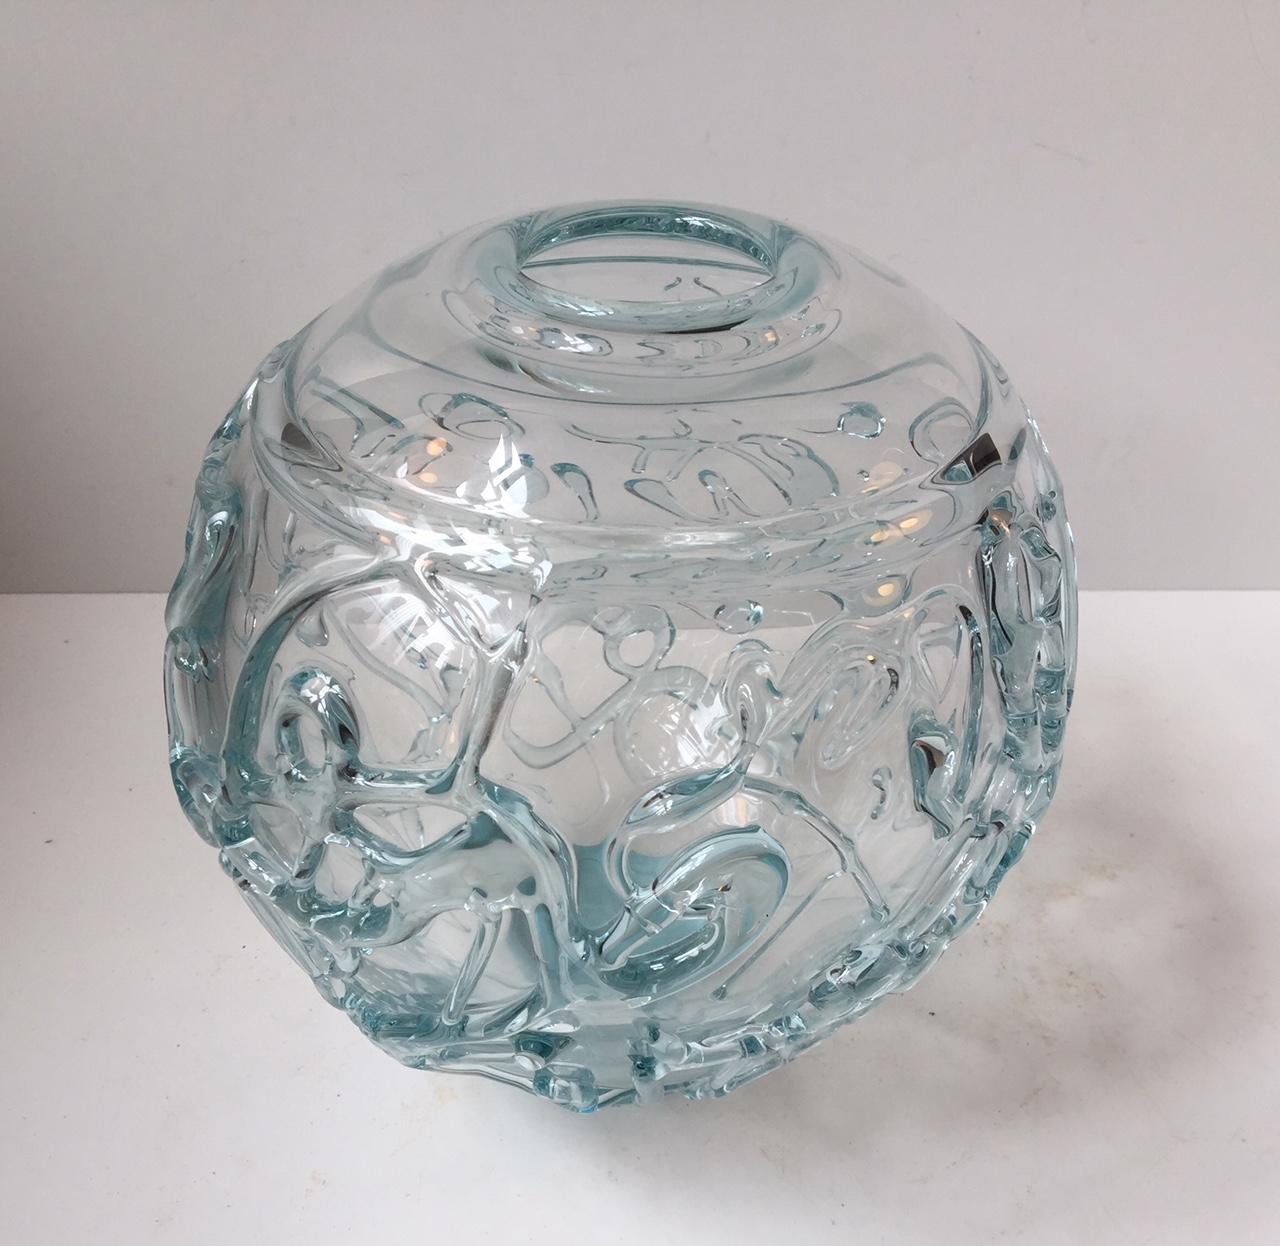 Danish Unique Spherical and Abstract Glass Vase by Michael Bang for Holmegaard, Denmark